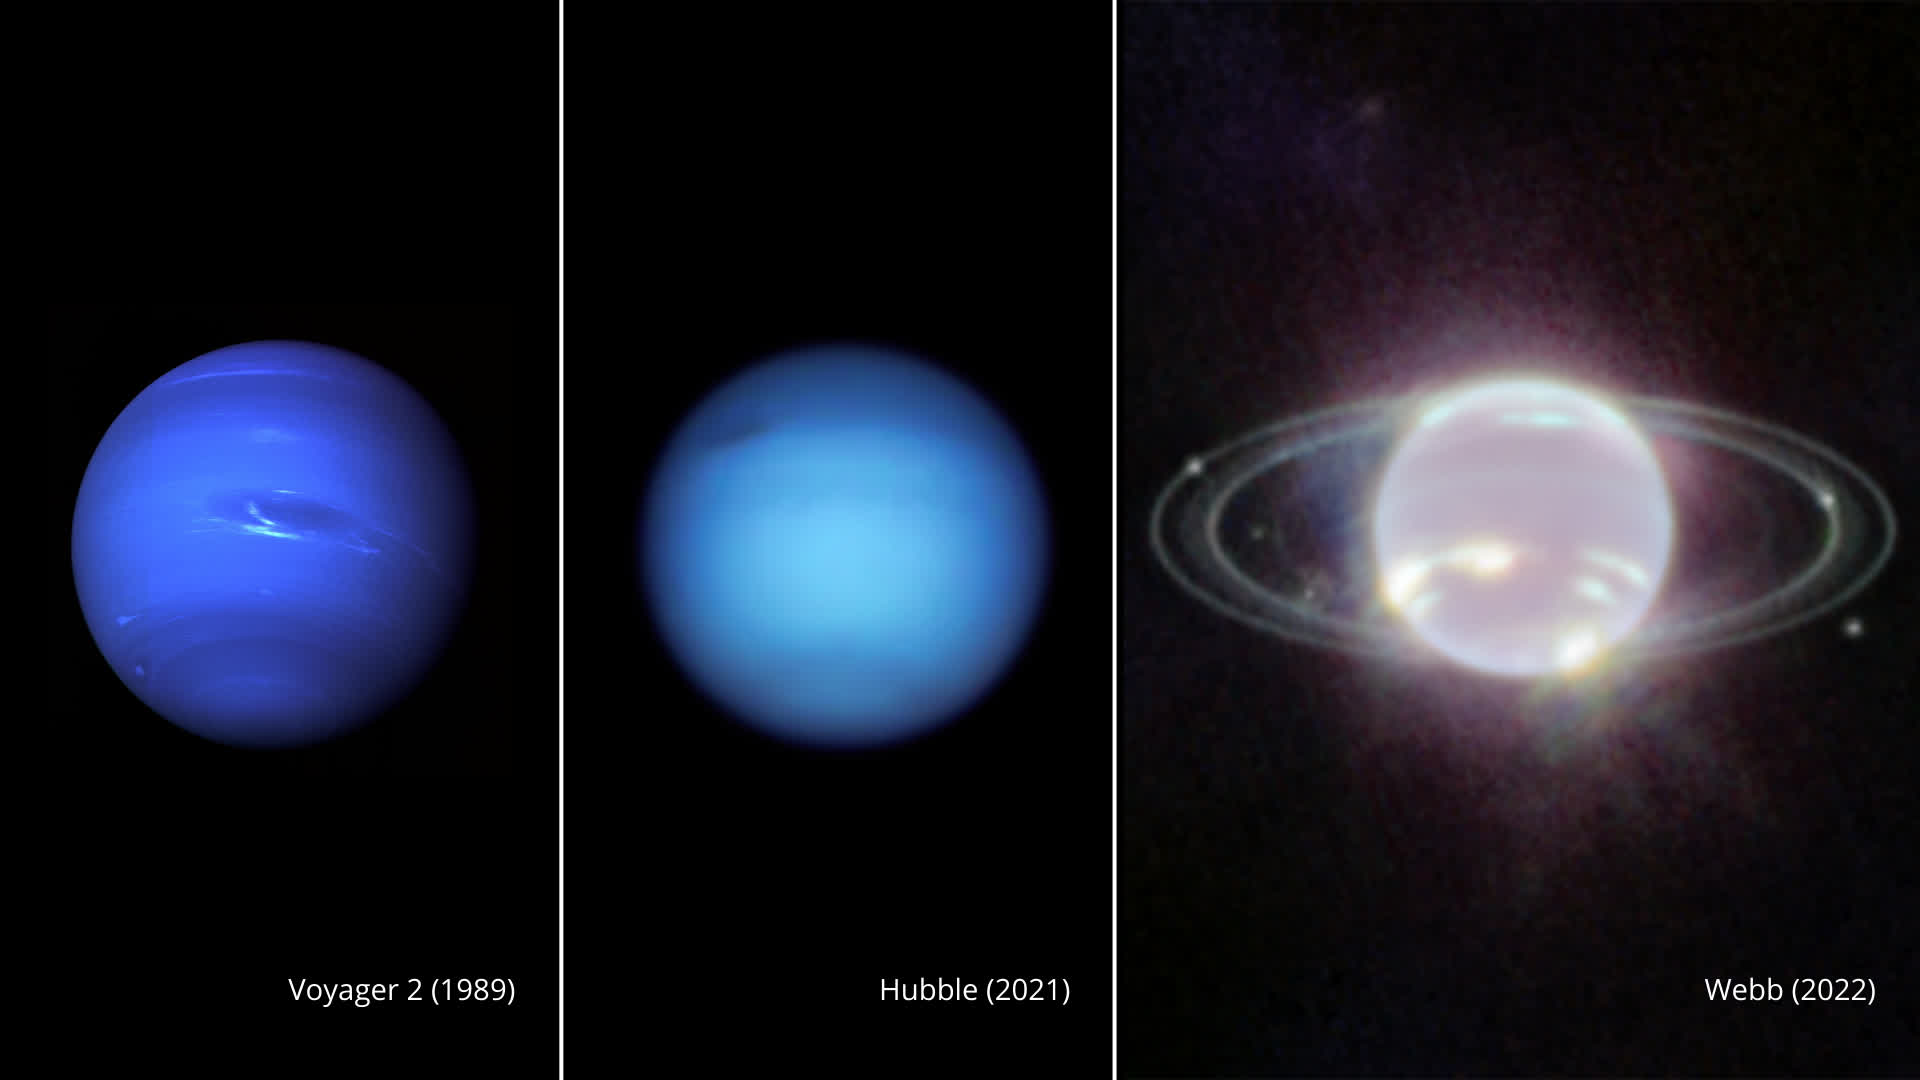 James Webb Telescope captures clearest image of Neptune's rings in more than 30 years